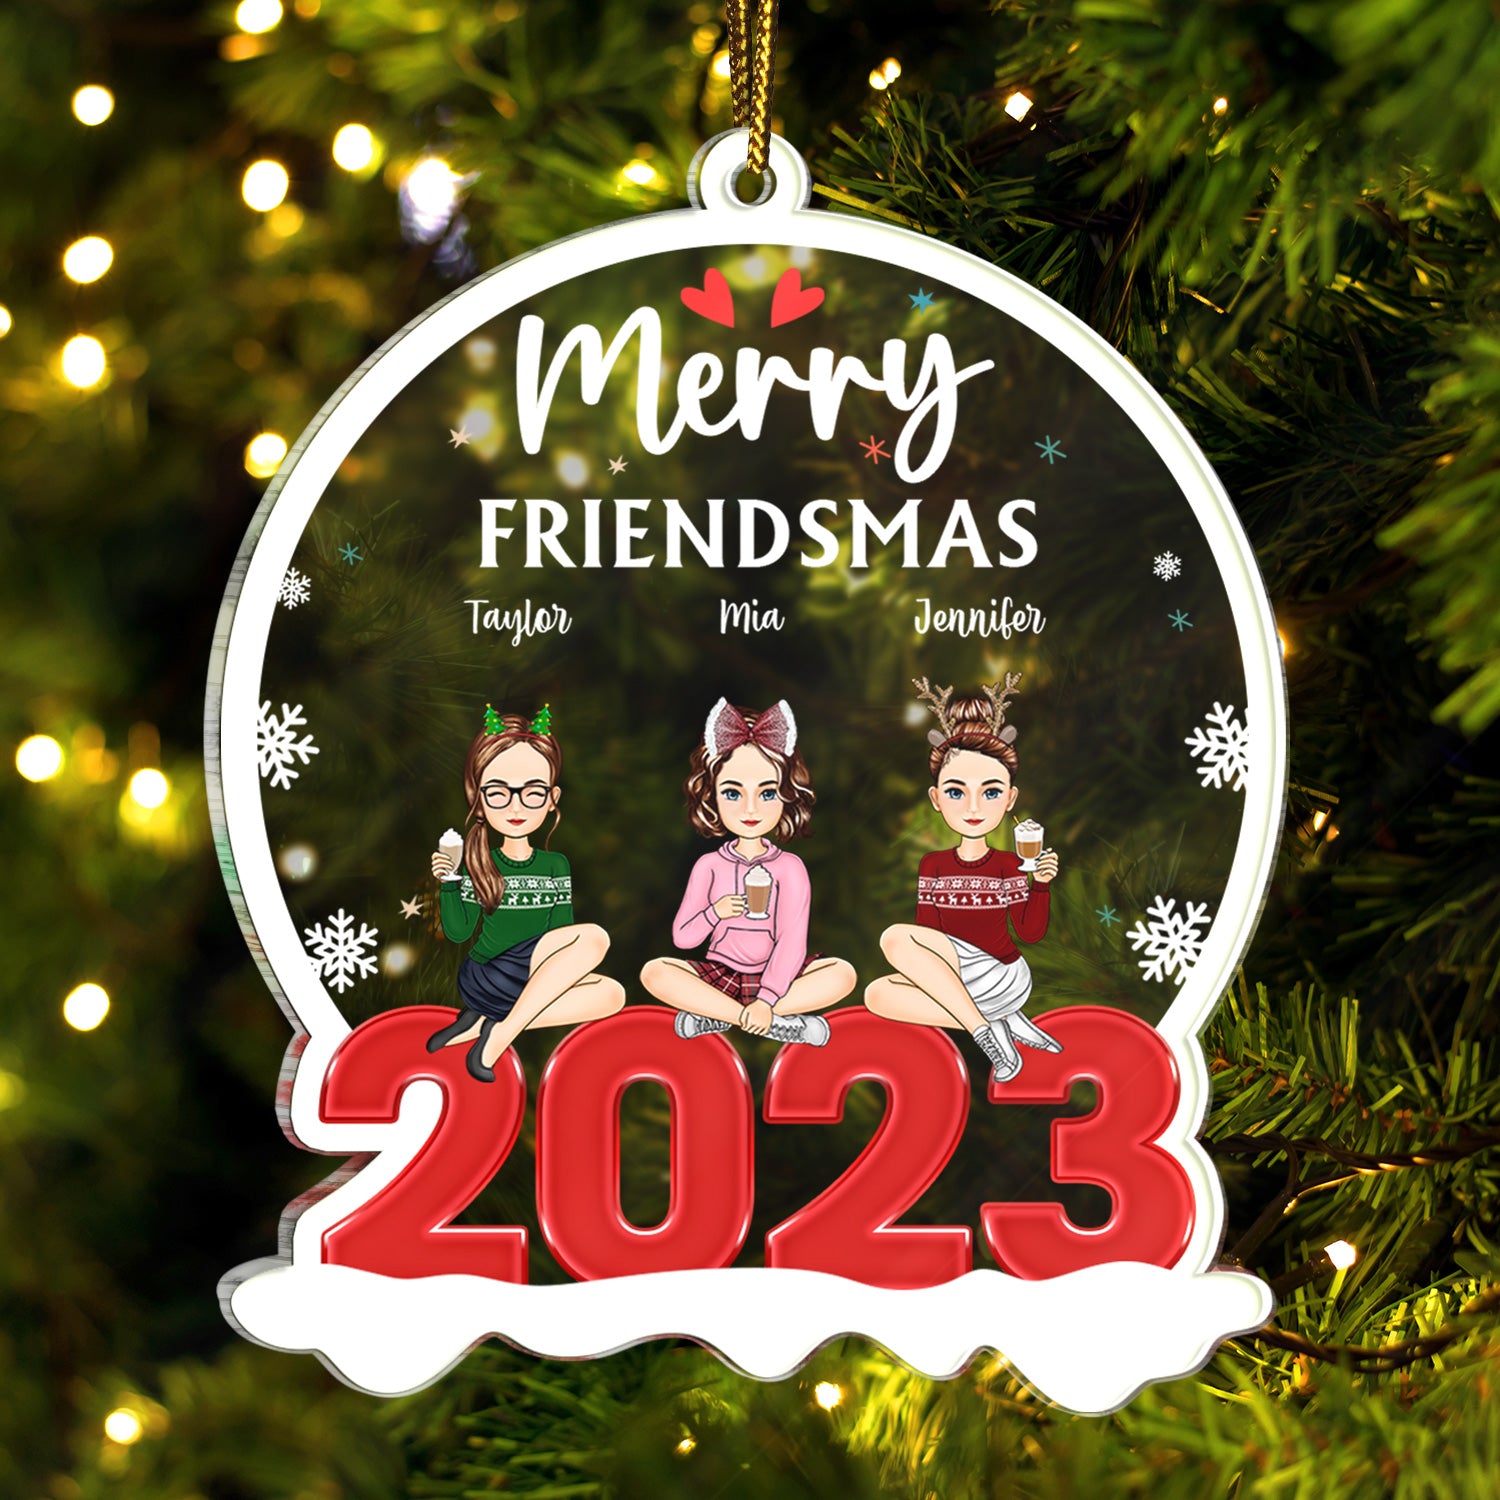 Merry Friendsmas - Christmas Gift For Besties - Personalized Custom Shaped Acrylic Ornament